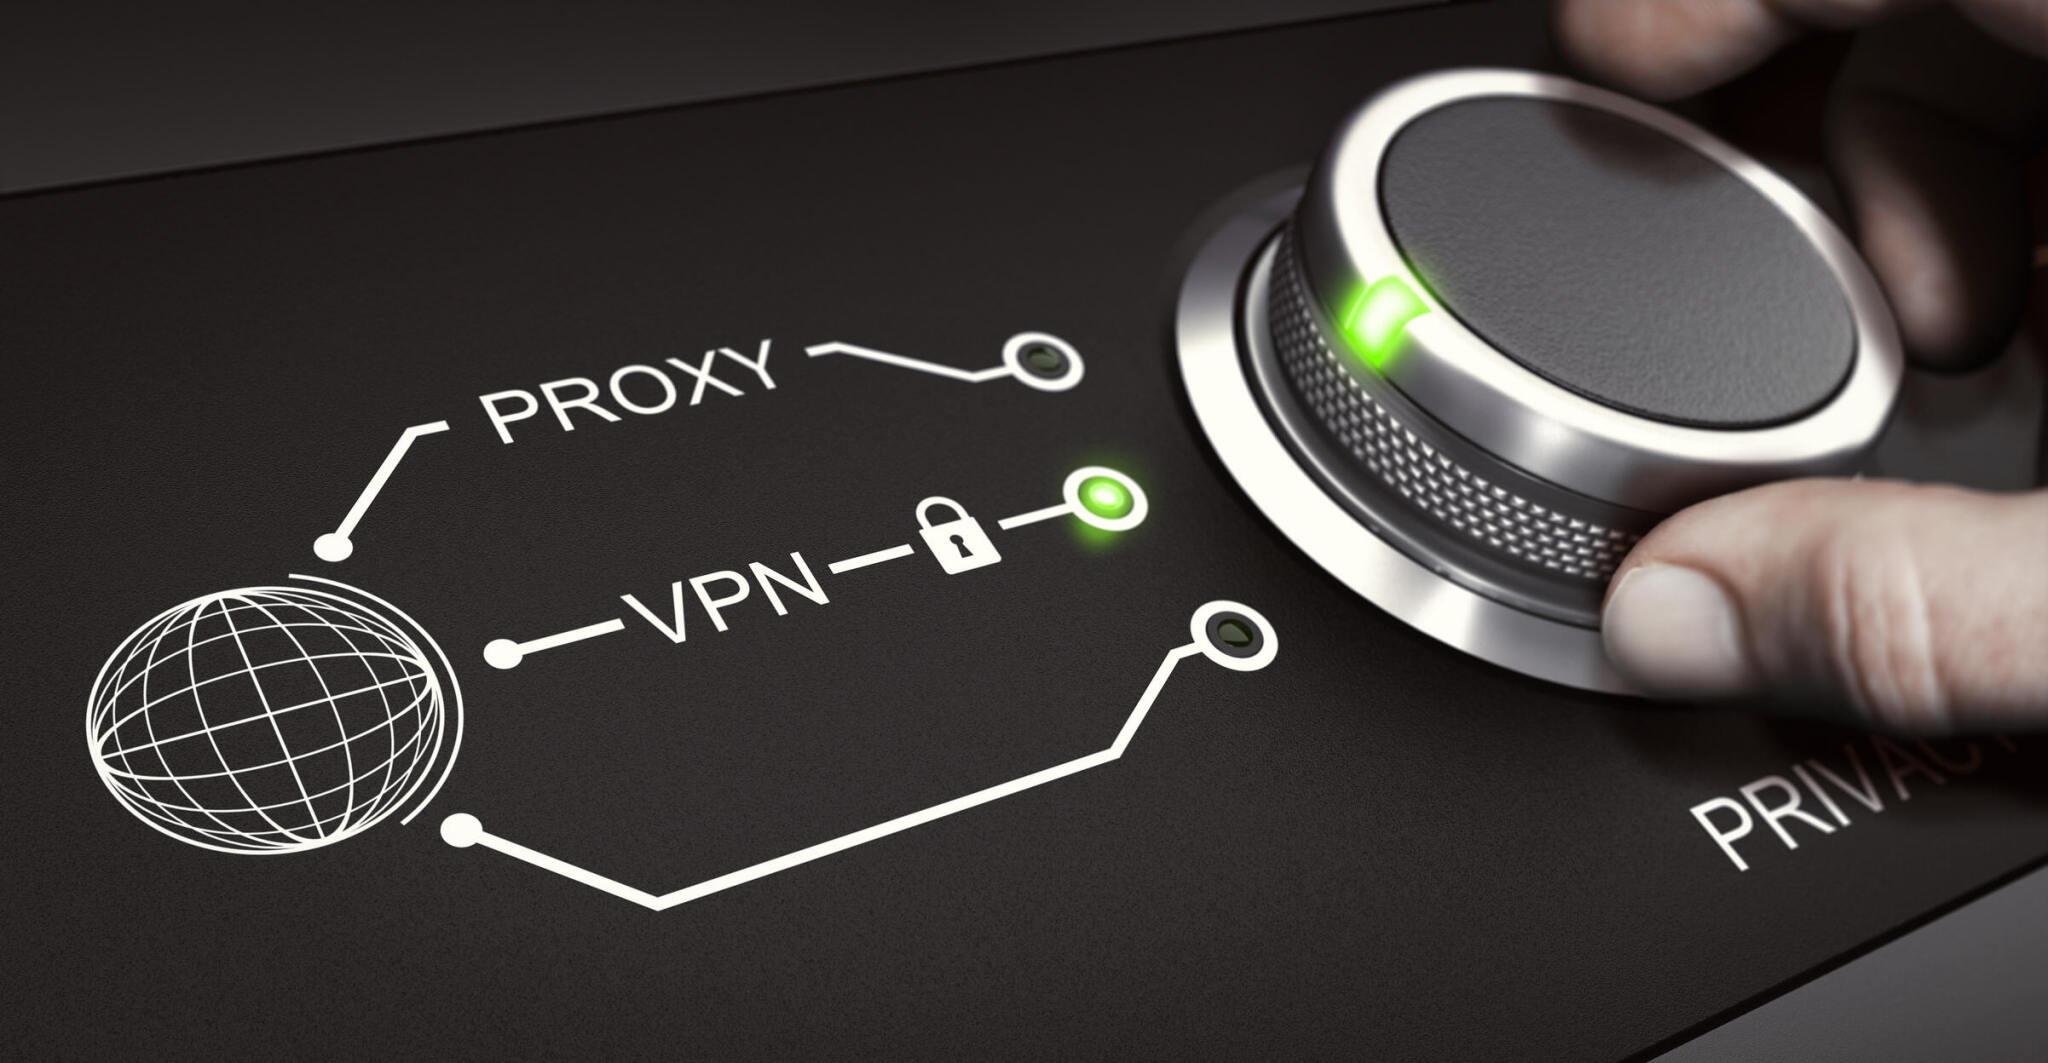 VPN and Proxy ON and OFF Switch